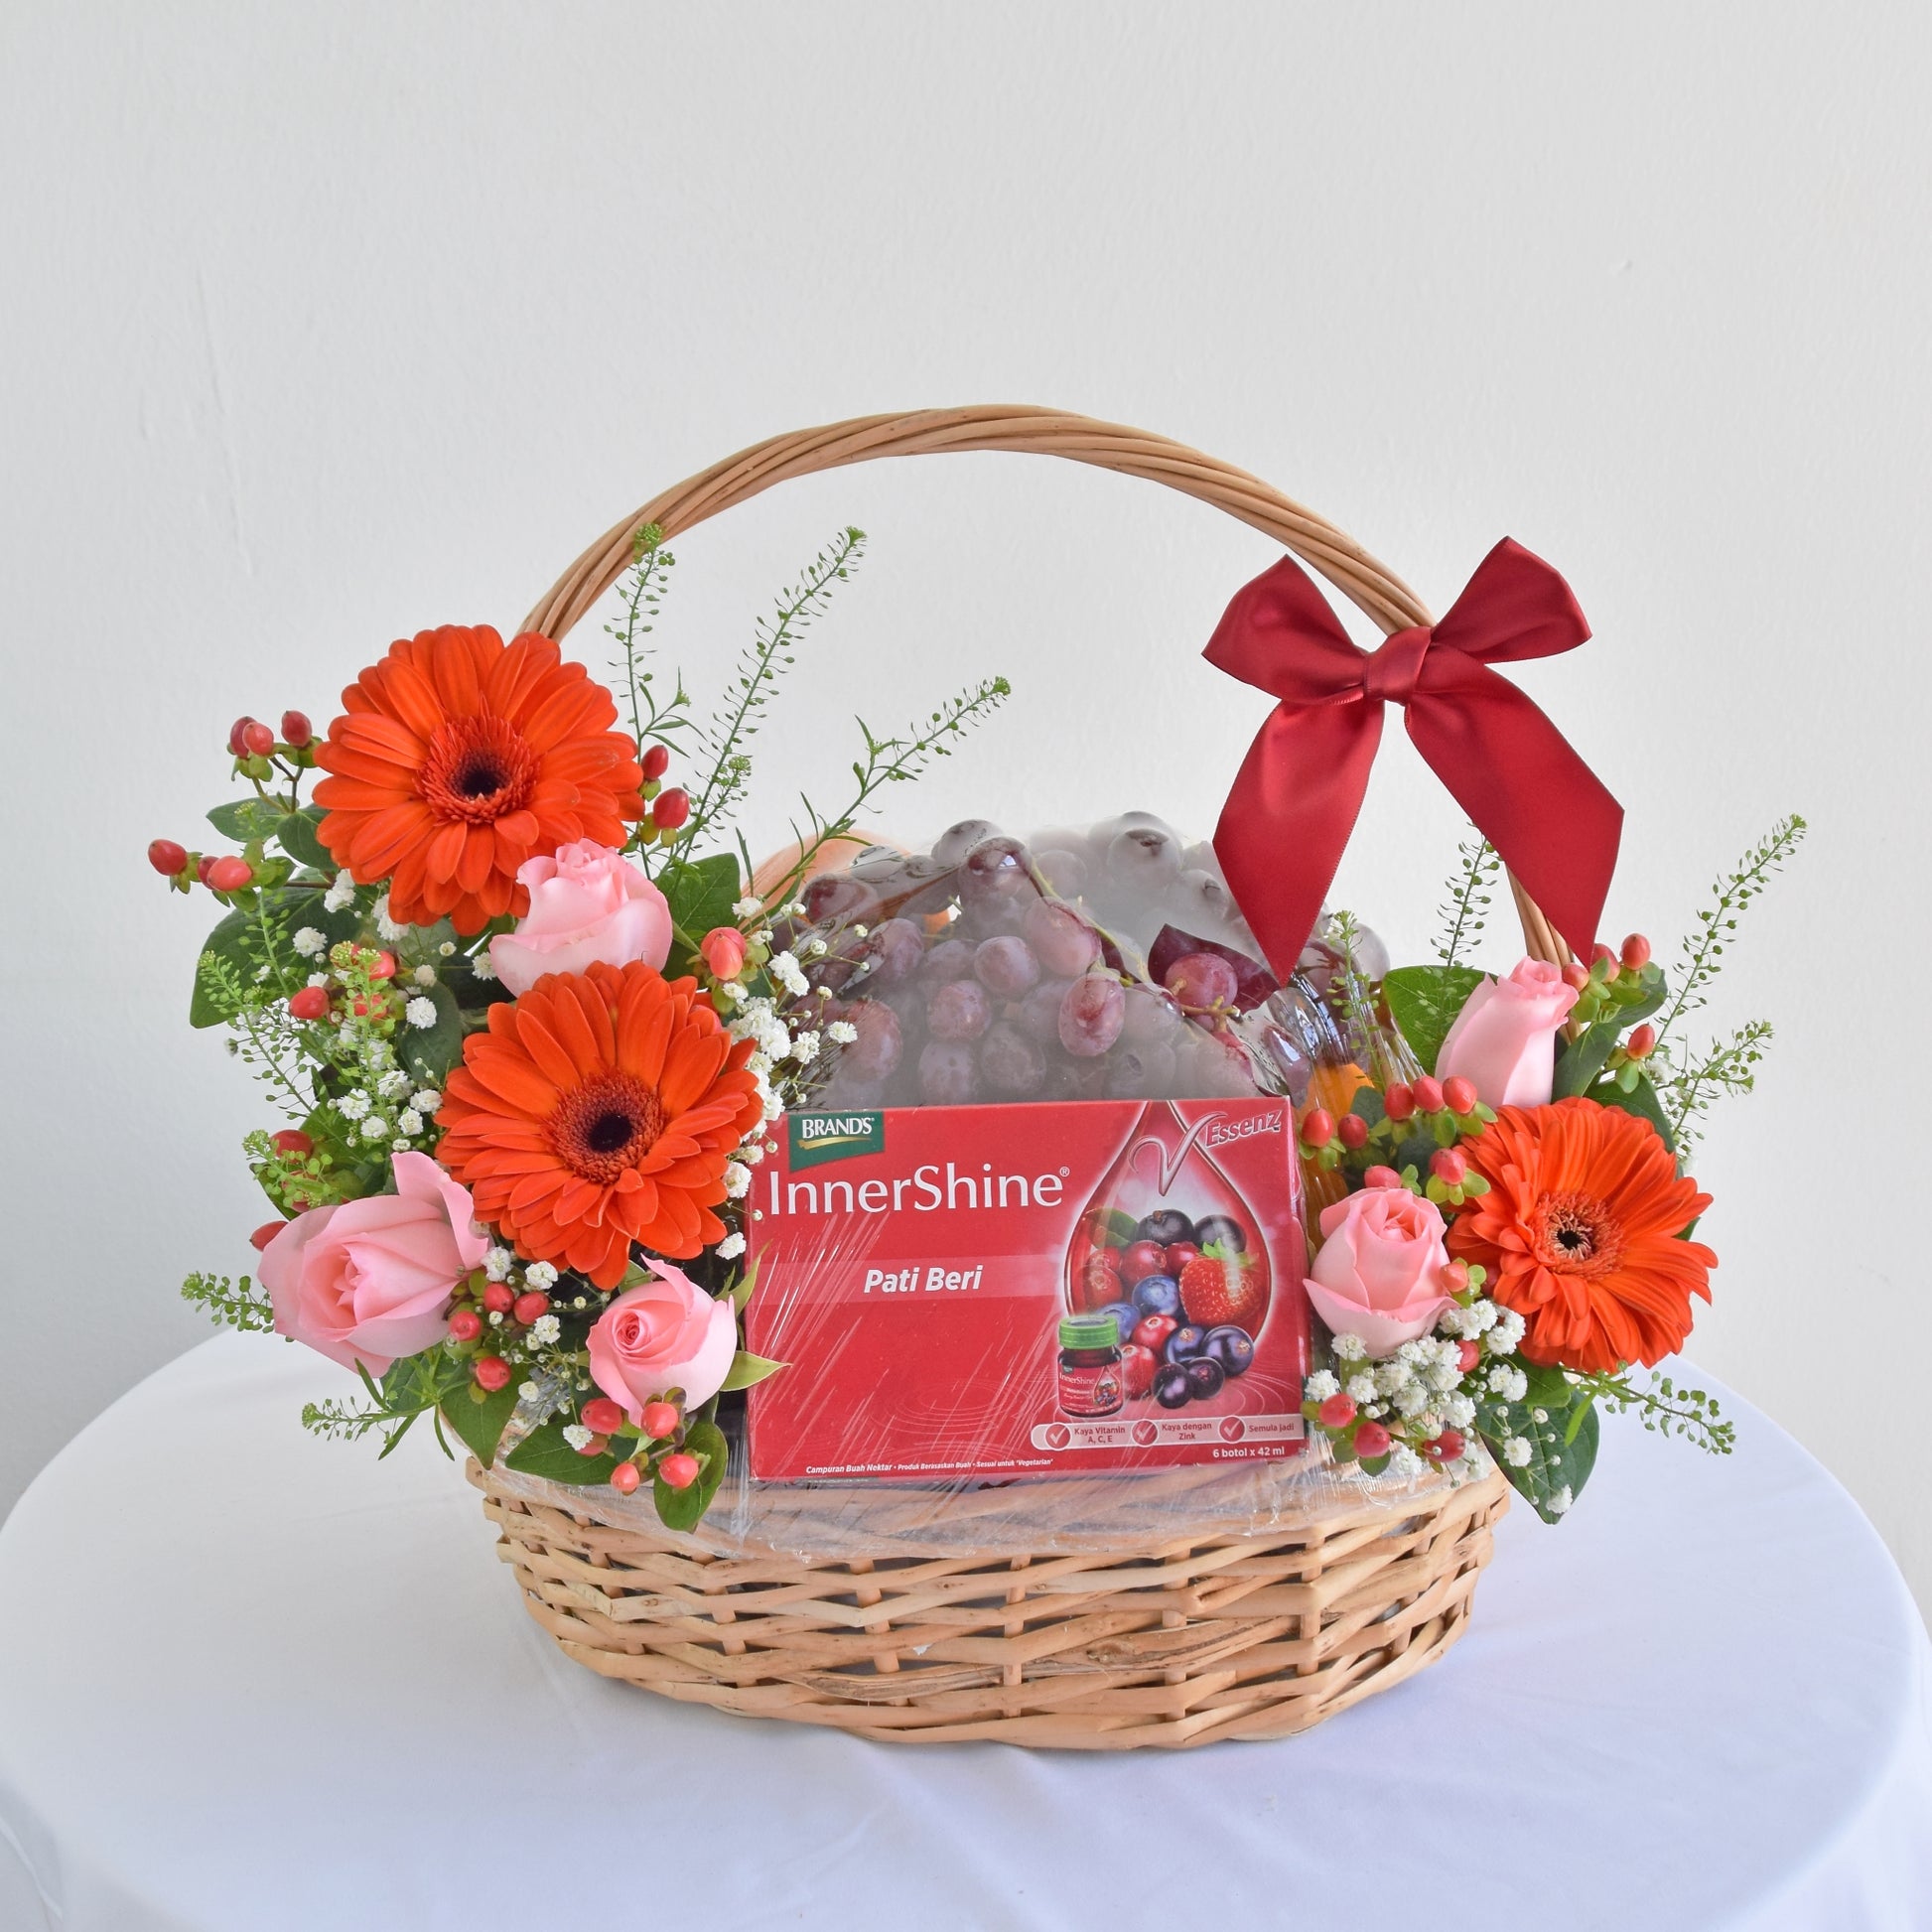 Fruit Basket Delivery with brand's innershine essence |Healthy Shine